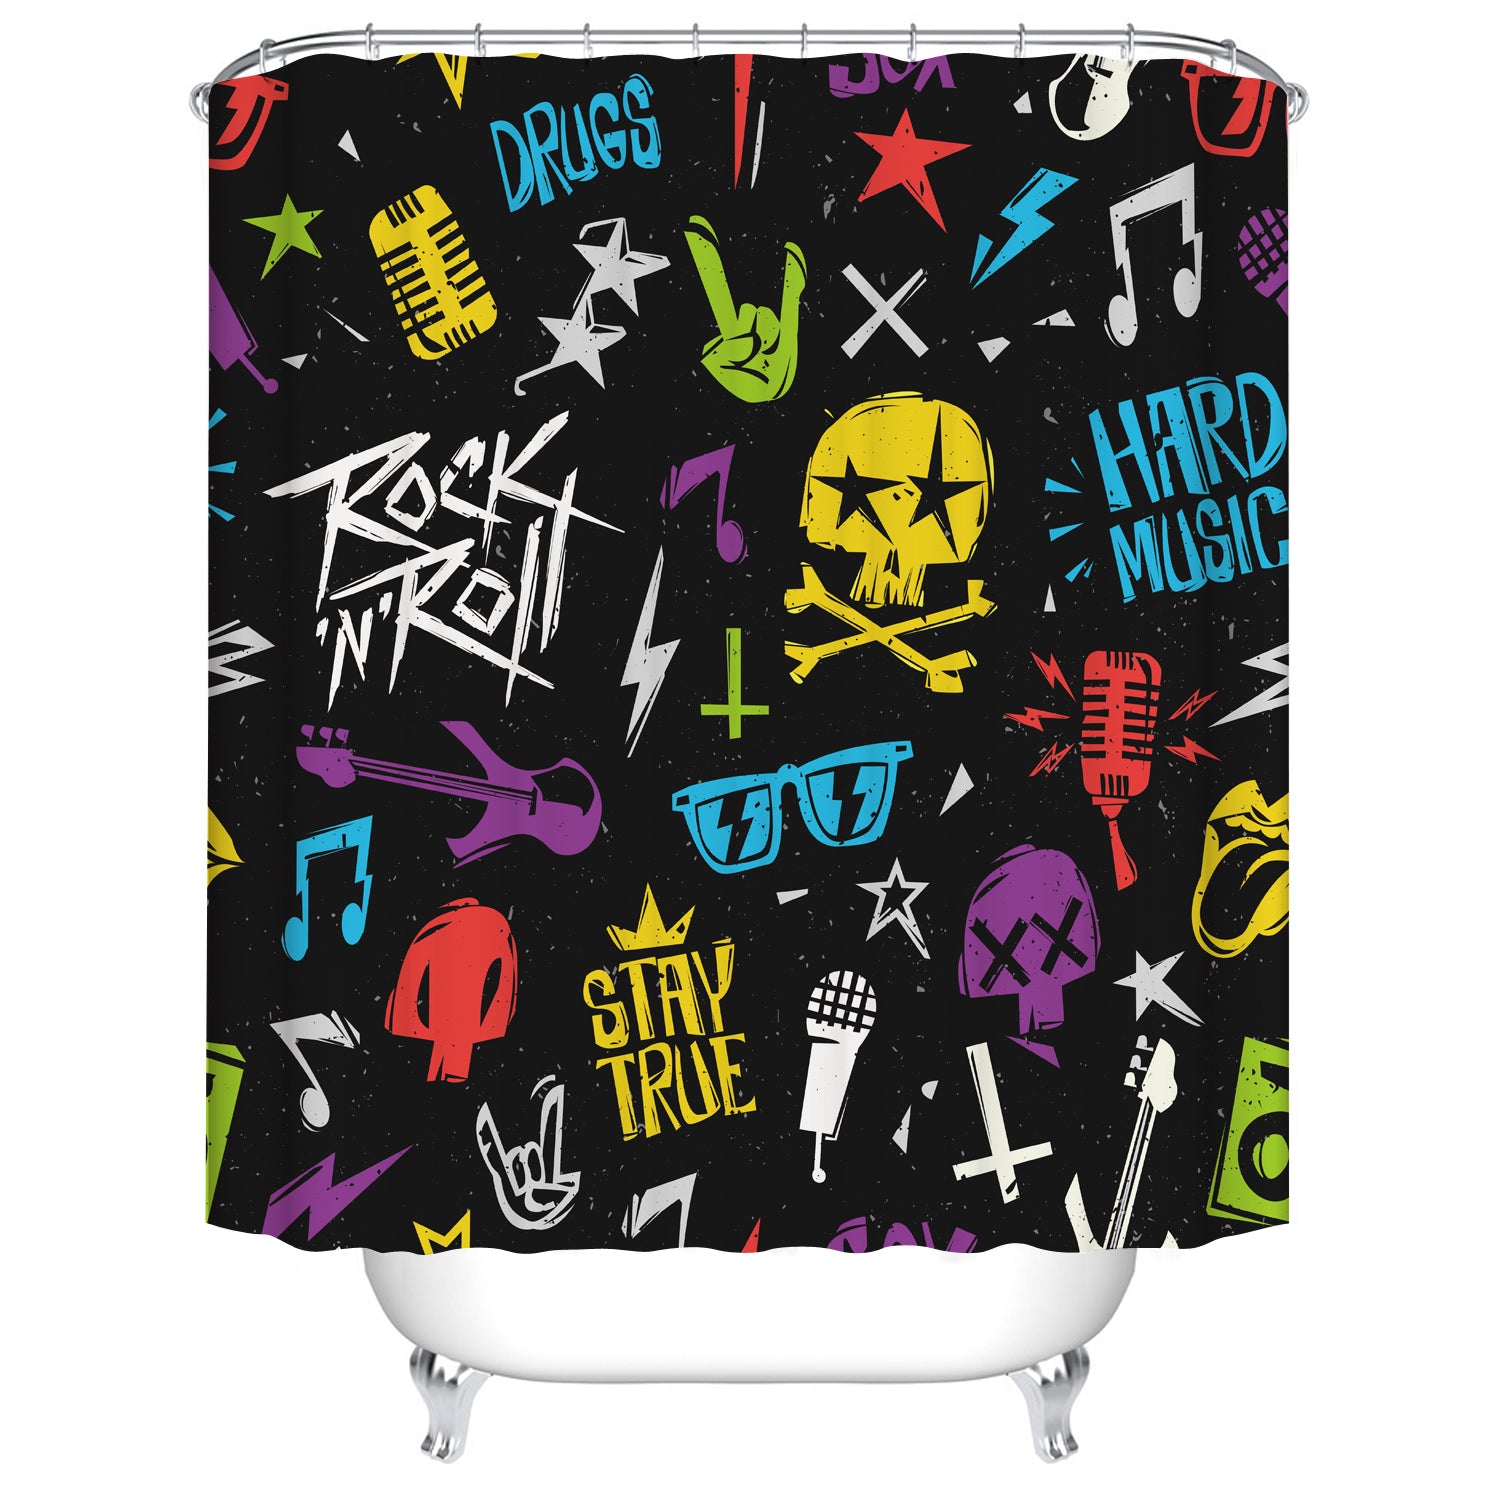 Colorful Chalkboard Art Hippie Quote Inspired Rock and Roll Shower Curtain